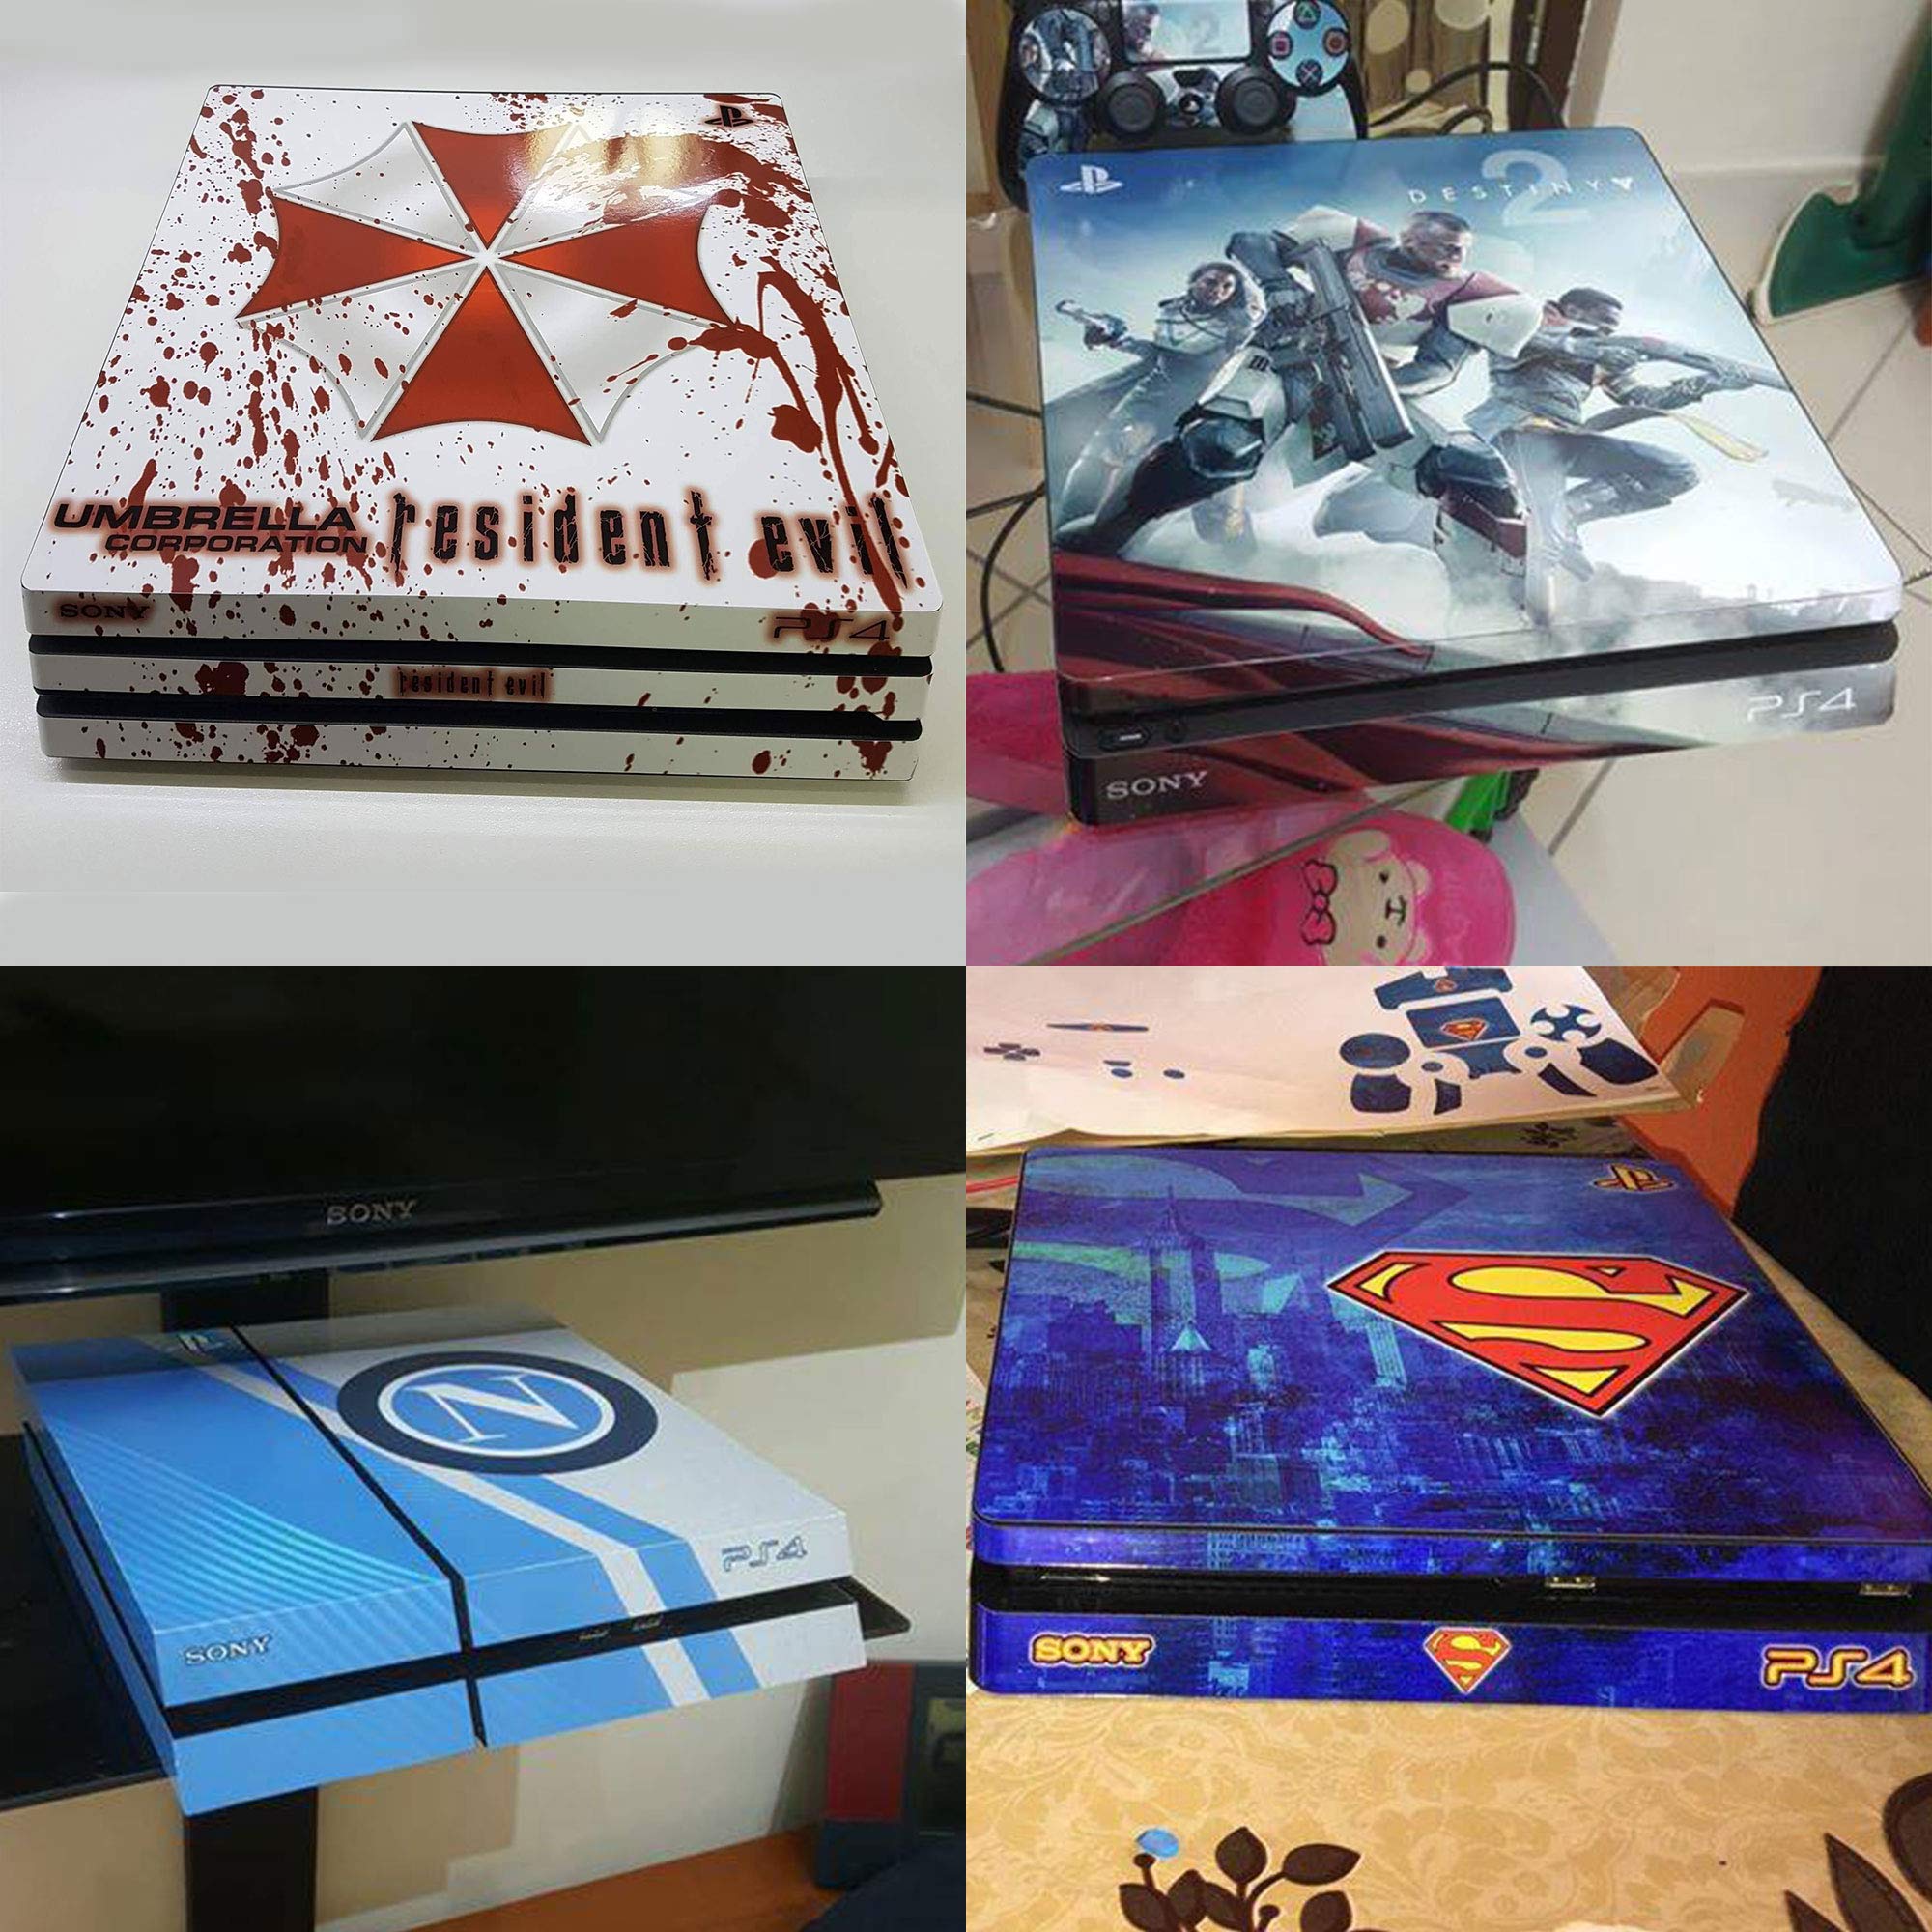 Skin Ps4 PRO - Superman - Limited Edition Decal Cover ADESIVA Playstation 4 Slim Sony Bundle